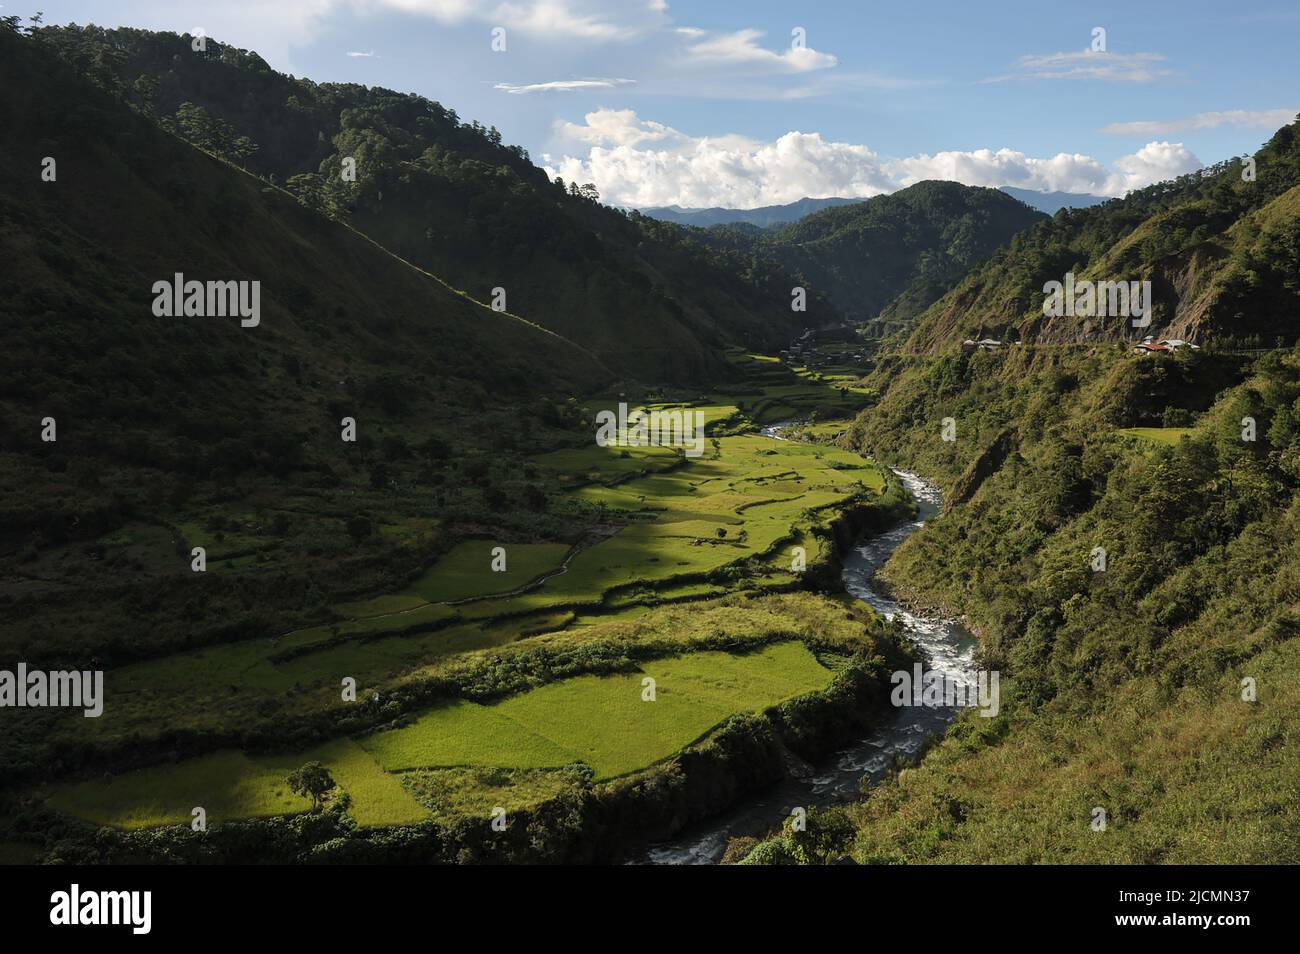 Mountain Province, Philippines: vibrant landscape of mountains surrounding rice fields beside a winding river on the road to Sagada from Batad. Stock Photo